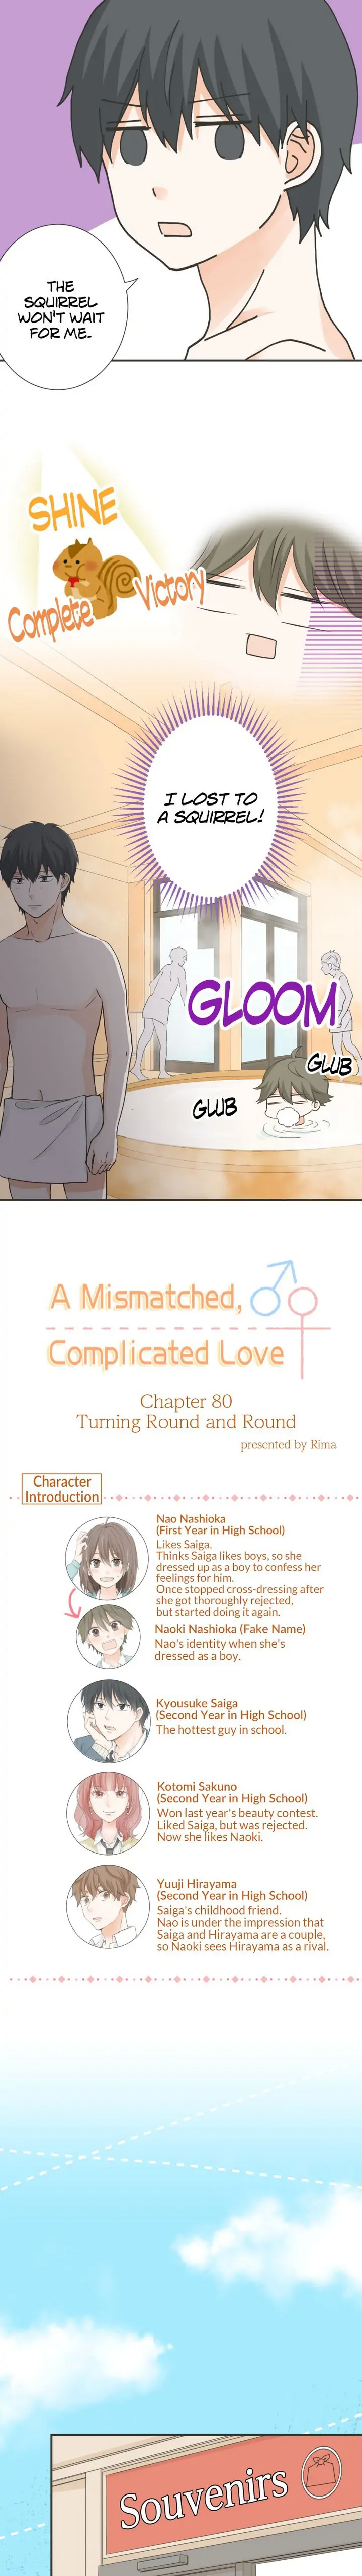 Mismatched Love Chapter 80 #3